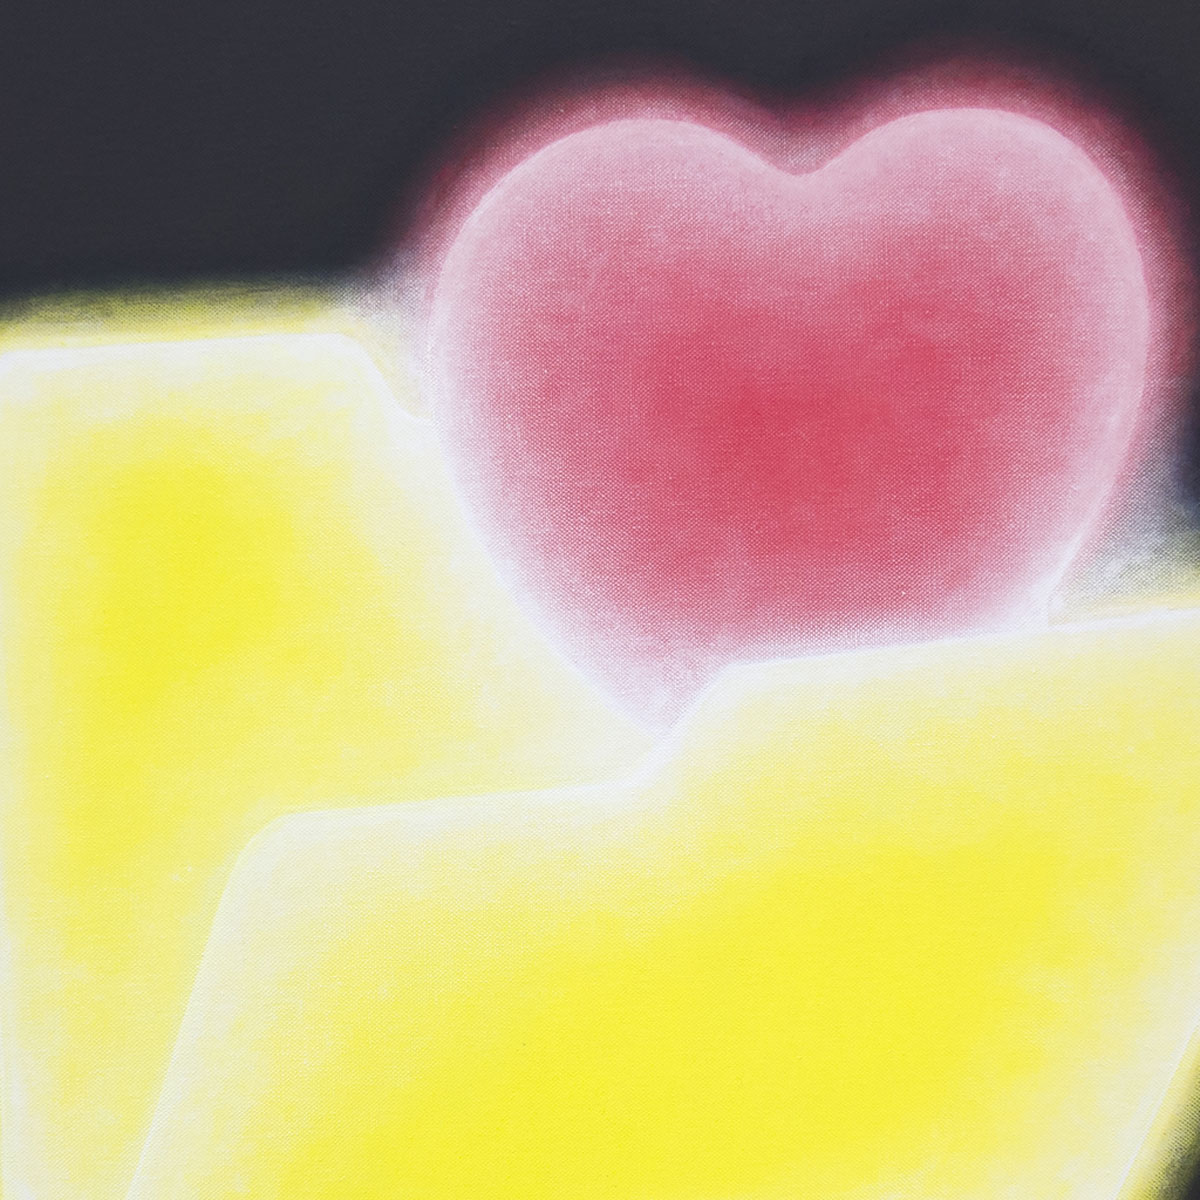 Yellow folder with red heart peeking out against black background